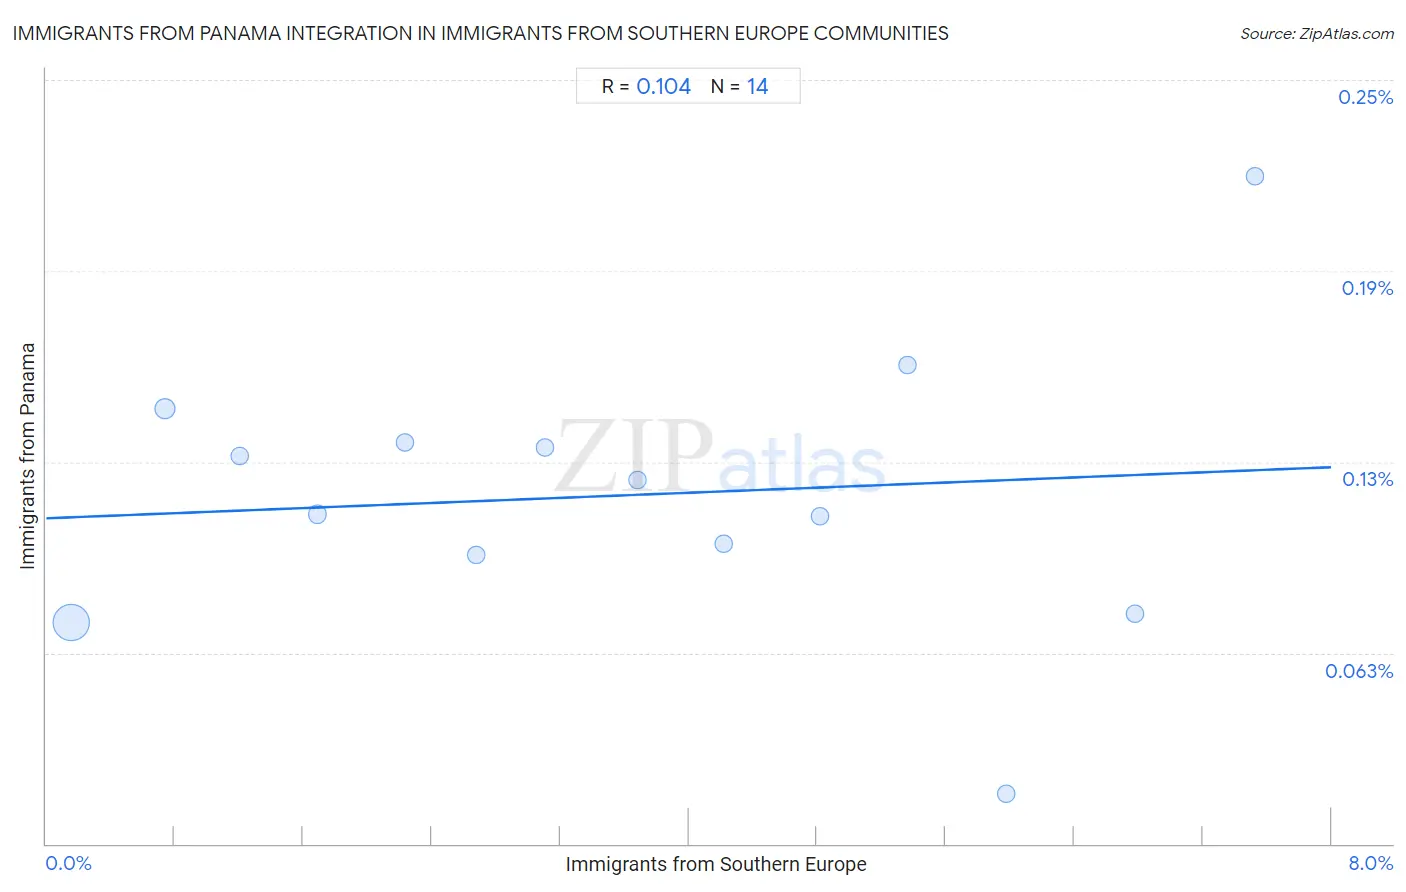 Immigrants from Southern Europe Integration in Immigrants from Panama Communities